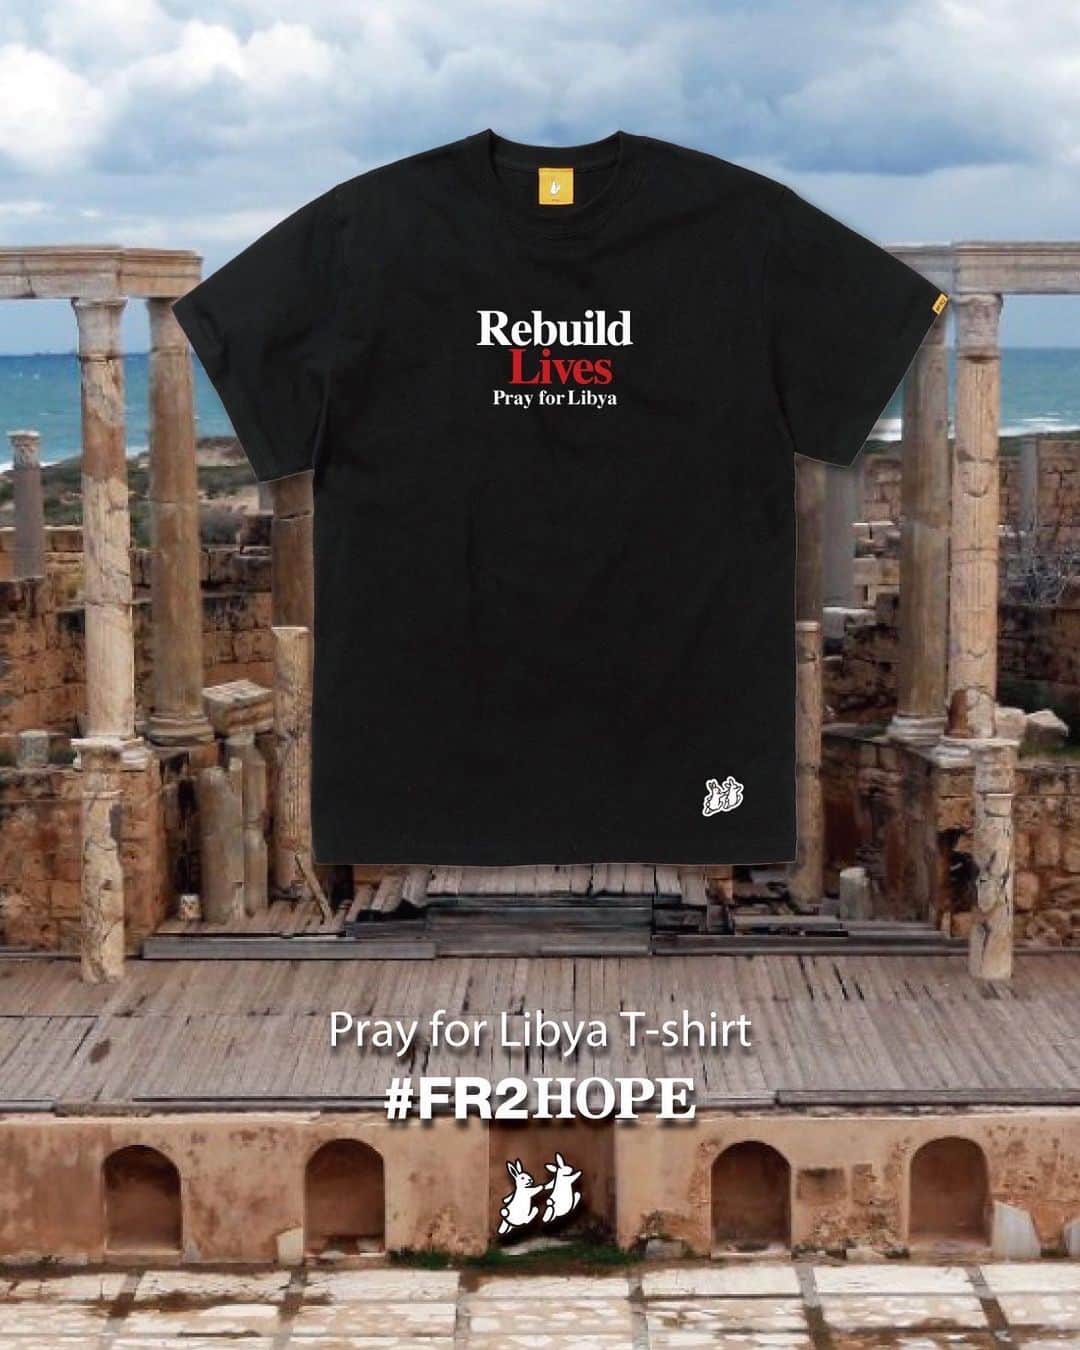 #FR2さんのインスタグラム写真 - (#FR2Instagram)「#FR2Hope As a project, we will provide support for the disaster that occurred in Libya on September 10th. Starting today, we will start accepting orders at the #FR2 Online Store. All proceeds from product sales, minus the costs involved in producing this project, will be donated to the Japanese Red Cross Society.  Starting today, we will start accepting orders at the #FR2 online store. All proceeds from the sales of the low-cost products produced in this project will be donated to the Japanese Red Cross Society.  Order period: September 14th (Thursday) to September 20th (Wednesday), 2023  #FR2希望 プロジェクトとして、9月10日にリビアで発生した災害への支援を行います。 本日から #FR2 Online Storeで受注販売を開始いたします。 こちらの企画の制作にかかわるコストを引いた商品の売上の全ては、日本赤十字社に寄付します。  本日より#FR2オンラインストアで受注販売を開始いたします。 こちらの企画の制作にコストを抑えた商品の売上の全ては、日本赤十字社に寄付します。  受注期間：2023年9月14日（木）～20日（水）  #FR2Hope 作为一个项目，我们将为 9 月 10 日在利比亚发生的灾难提供支持。 从今天开始，我们将开始在 #FR2 在线商店接受订单。 产品销售的所有收益，减去制作该项目所涉及的成本，将捐赠给日本红十字会。  从今天开始，我们将开始在 #FR2 在线商店接受订单。 该项目生产的低成本产品的销售收入将全部捐赠给日本红十字会。  订购期间：2023年9月14日（星期四）至9月20日（星期三）  #FR2Hope 作為一個項目，我們將為 9 月 10 日在利比亞發生的災難提供支持。 從今天開始，我們將開始在 #FR2 在線商店接受訂單。 產品銷售的所有收益，減去製作該項目所涉及的成本，將捐贈給日本紅十字會。  從今天開始，我們將開始在 #FR2 在線商店接受訂單。 該項目生產的低成本產品的銷售收入將全部捐贈給日本紅十字會。  訂購期間：2023年9月14日（星期四）至9月20日（星期三）  #FR2希望　#FR2HOPE」9月14日 19時43分 - fxxkingrabbits